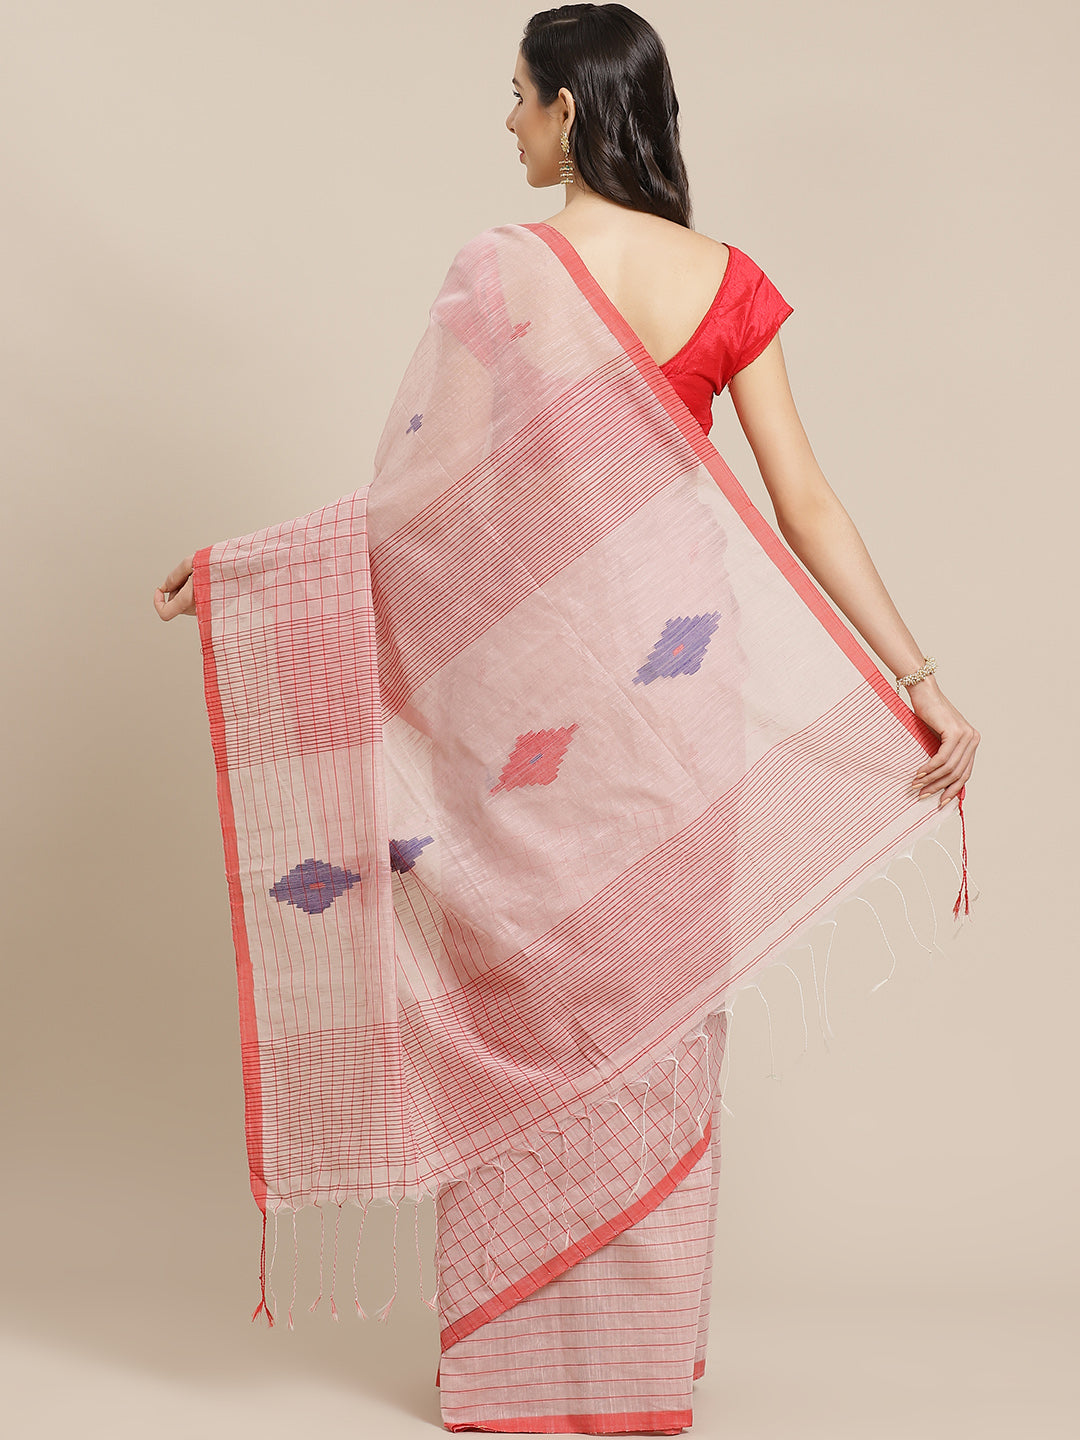 Pink and Red, Kalakari India Ikat Silk Cotton Woven Design Saree with Blouse SHBESA0055-Saree-Kalakari India-SHBESA0055-Bengal, Cotton, Geographical Indication, Hand Crafted, Heritage Prints, Ikkat, Natural Dyes, Red, Sarees, Sustainable Fabrics, Woven, Yellow-[Linen,Ethnic,wear,Fashionista,Handloom,Handicraft,Indigo,blockprint,block,print,Cotton,Chanderi,Blue, latest,classy,party,bollywood,trendy,summer,style,traditional,formal,elegant,unique,style,hand,block,print, dabu,booti,gift,present,glam